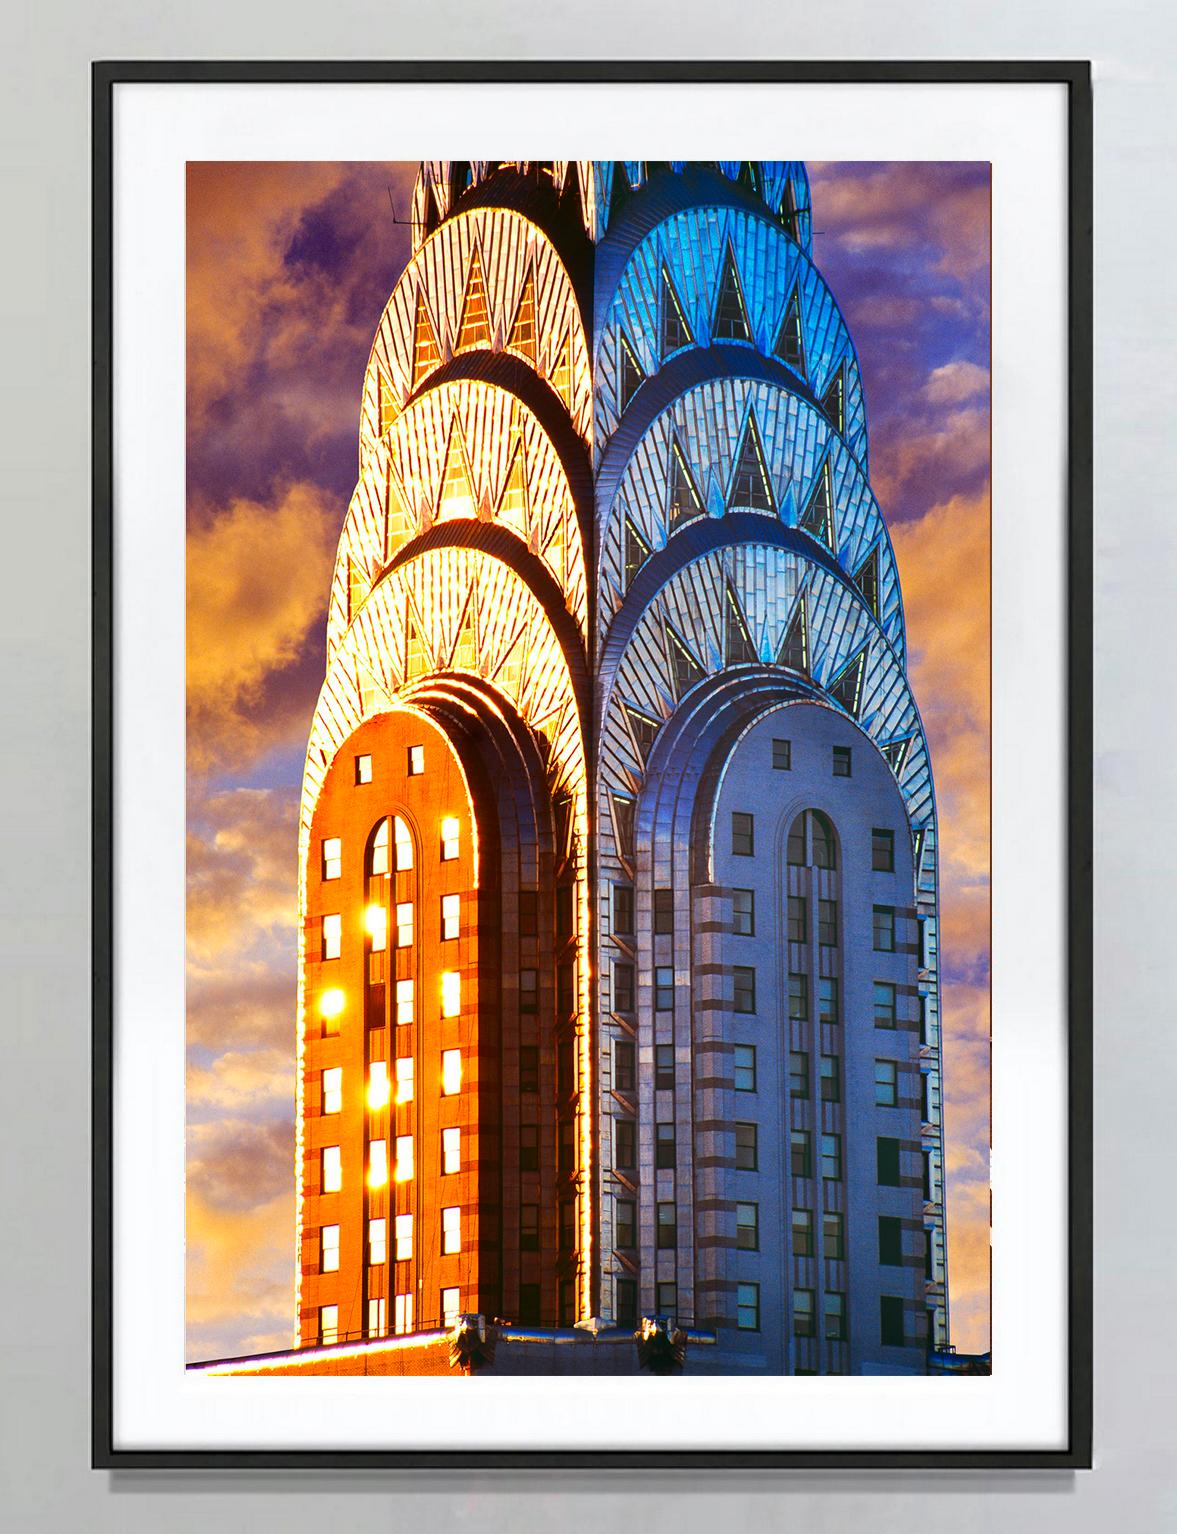 Chrysler Building Top  Art Deco Skyscraper in Gold - Photograph by Mitchell Funk